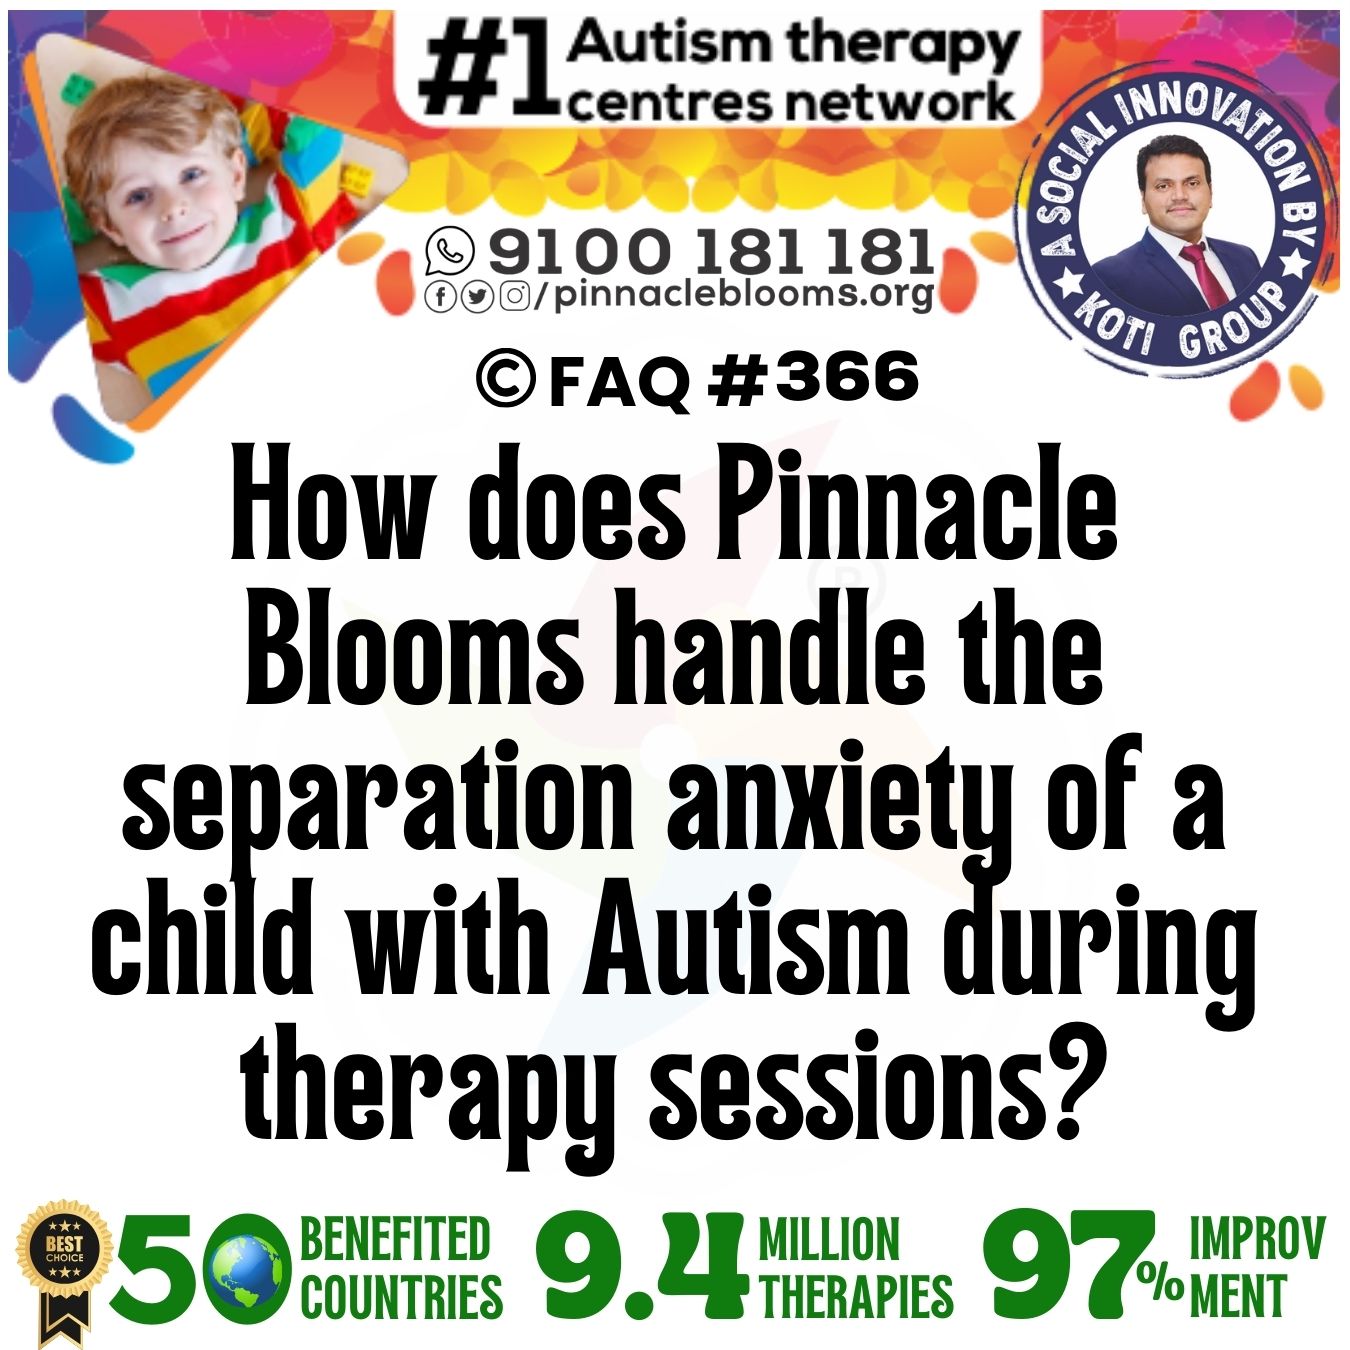 How does Pinnacle Blooms handle the separation anxiety of a child with Autism during therapy sessions?